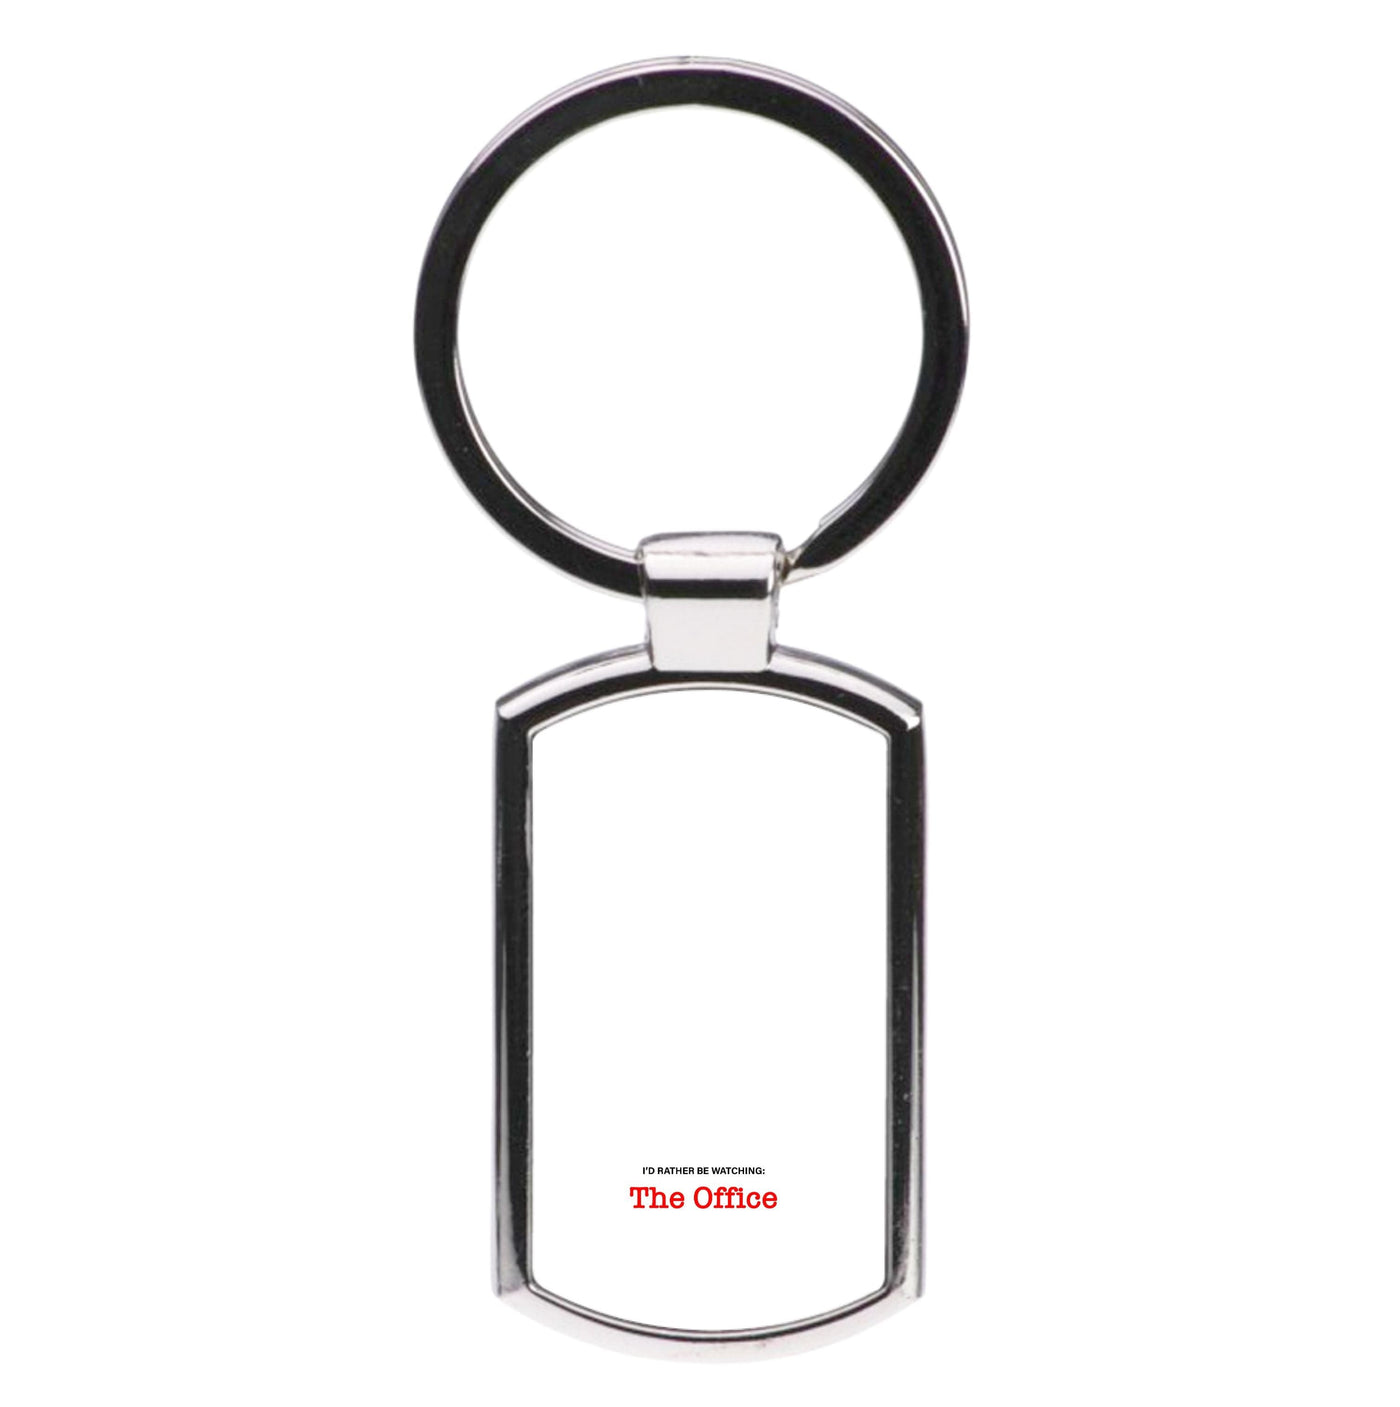 I'd Rather Be Watching The Office - The Office Luxury Keyring